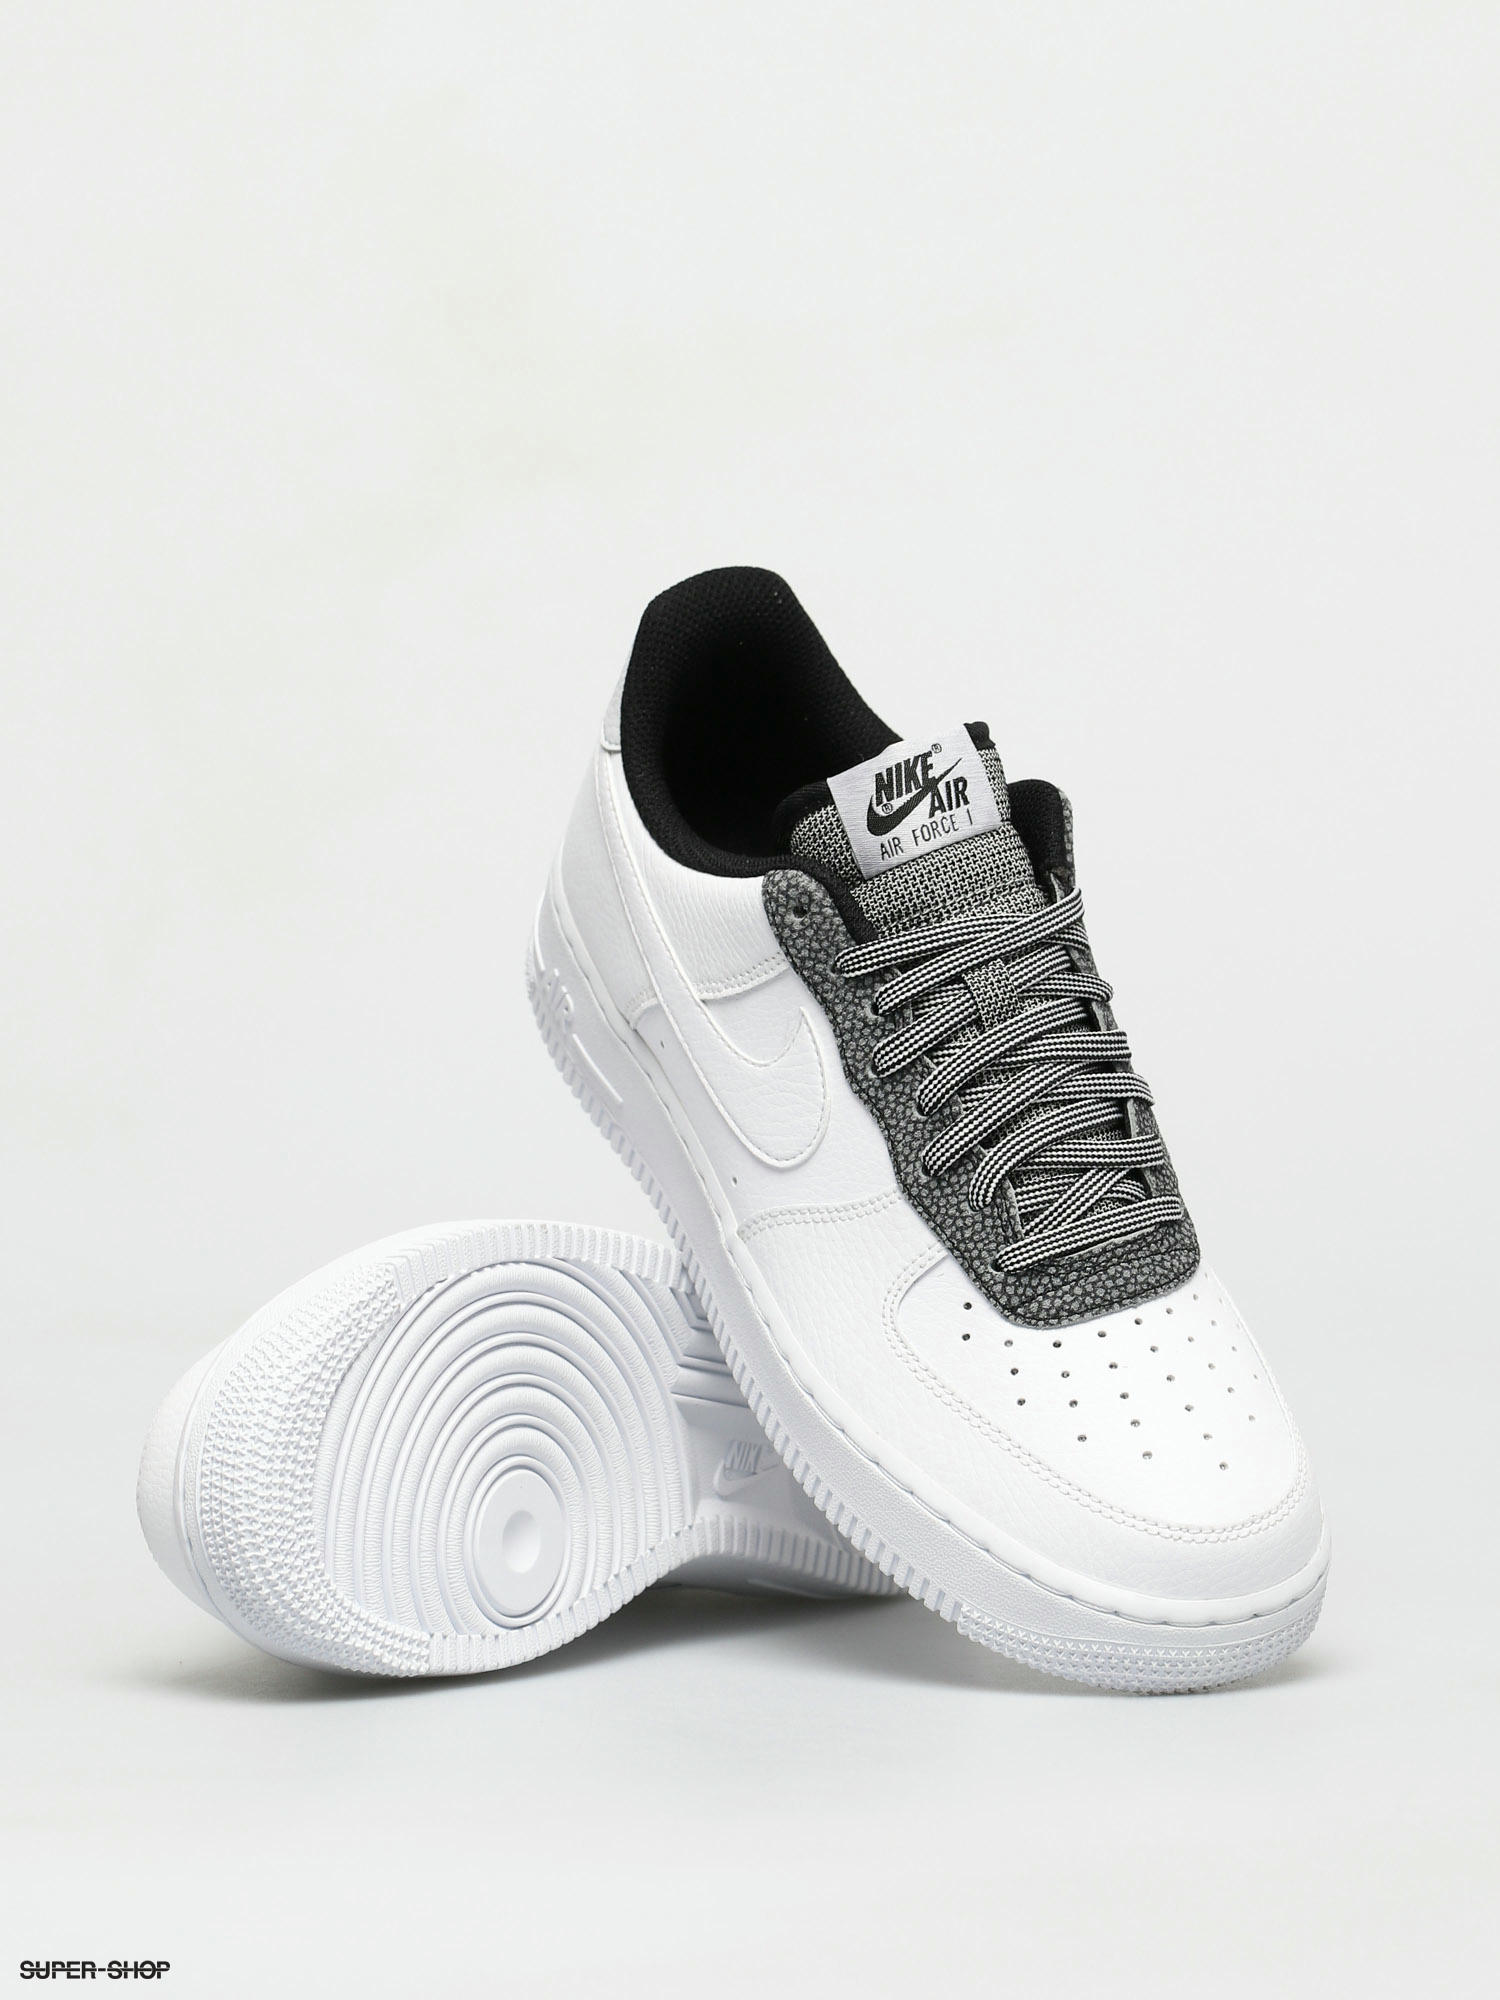 nike air force 1 lv8 white and grey